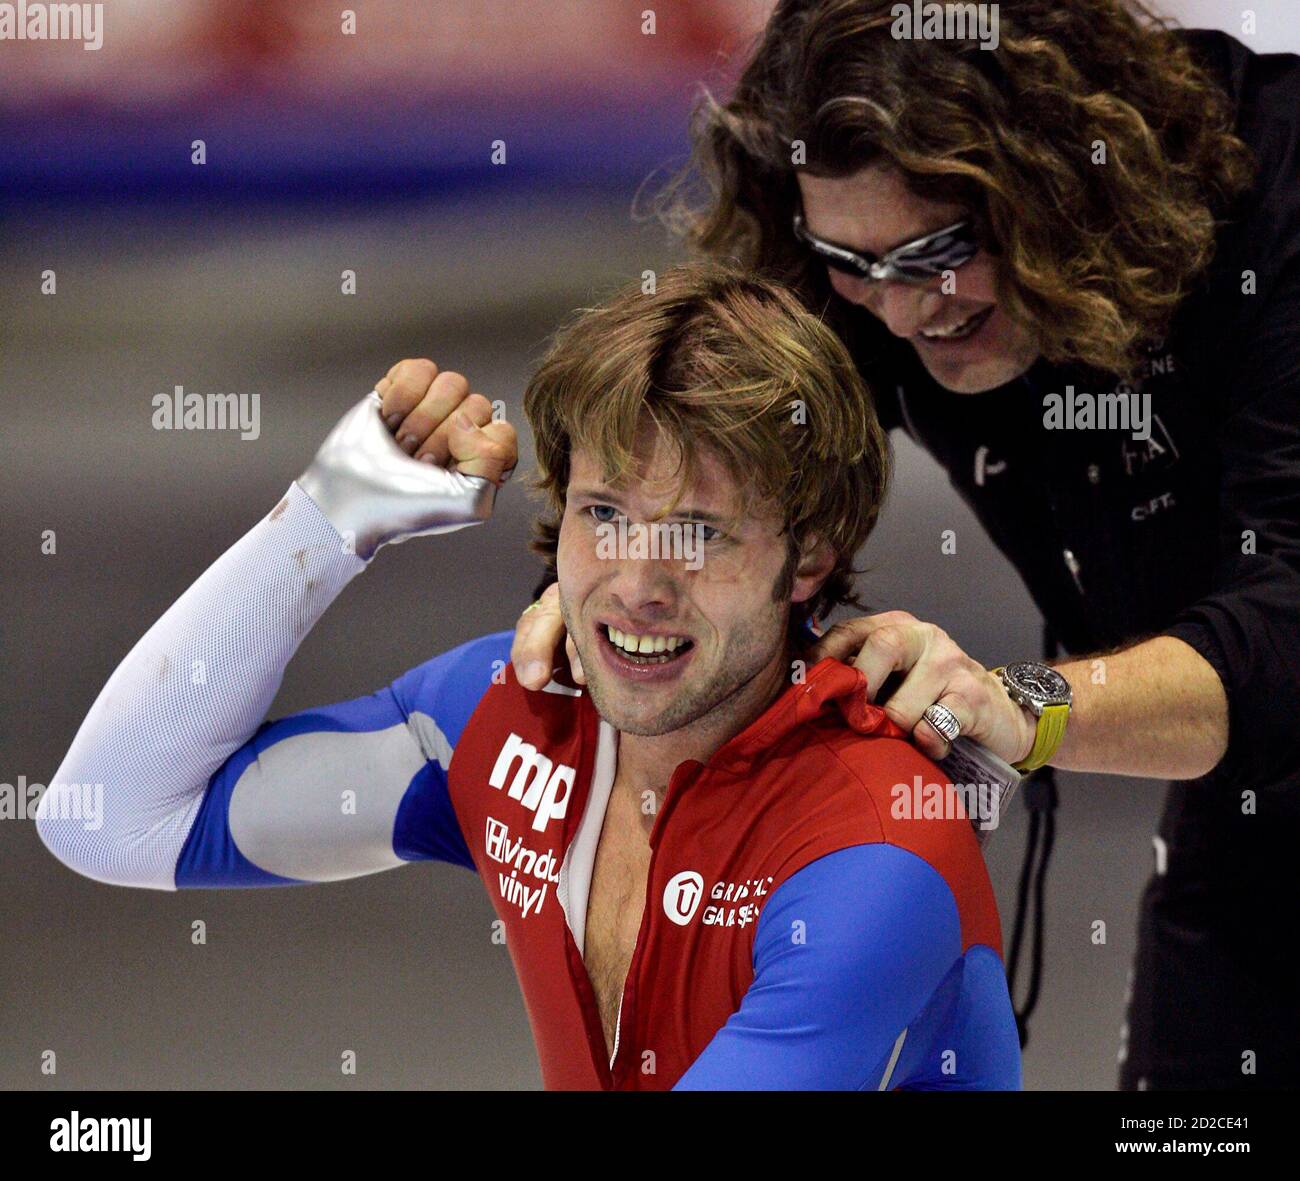 Eskil Ervik of Norway reacts with coach Peter Muller after the 10000-metre  speedskating race at the ISU World Cup at the Thialf Stadium in Heerenveen,  the Netherlands December 4, 2005. REUTERS/Michael Kooren